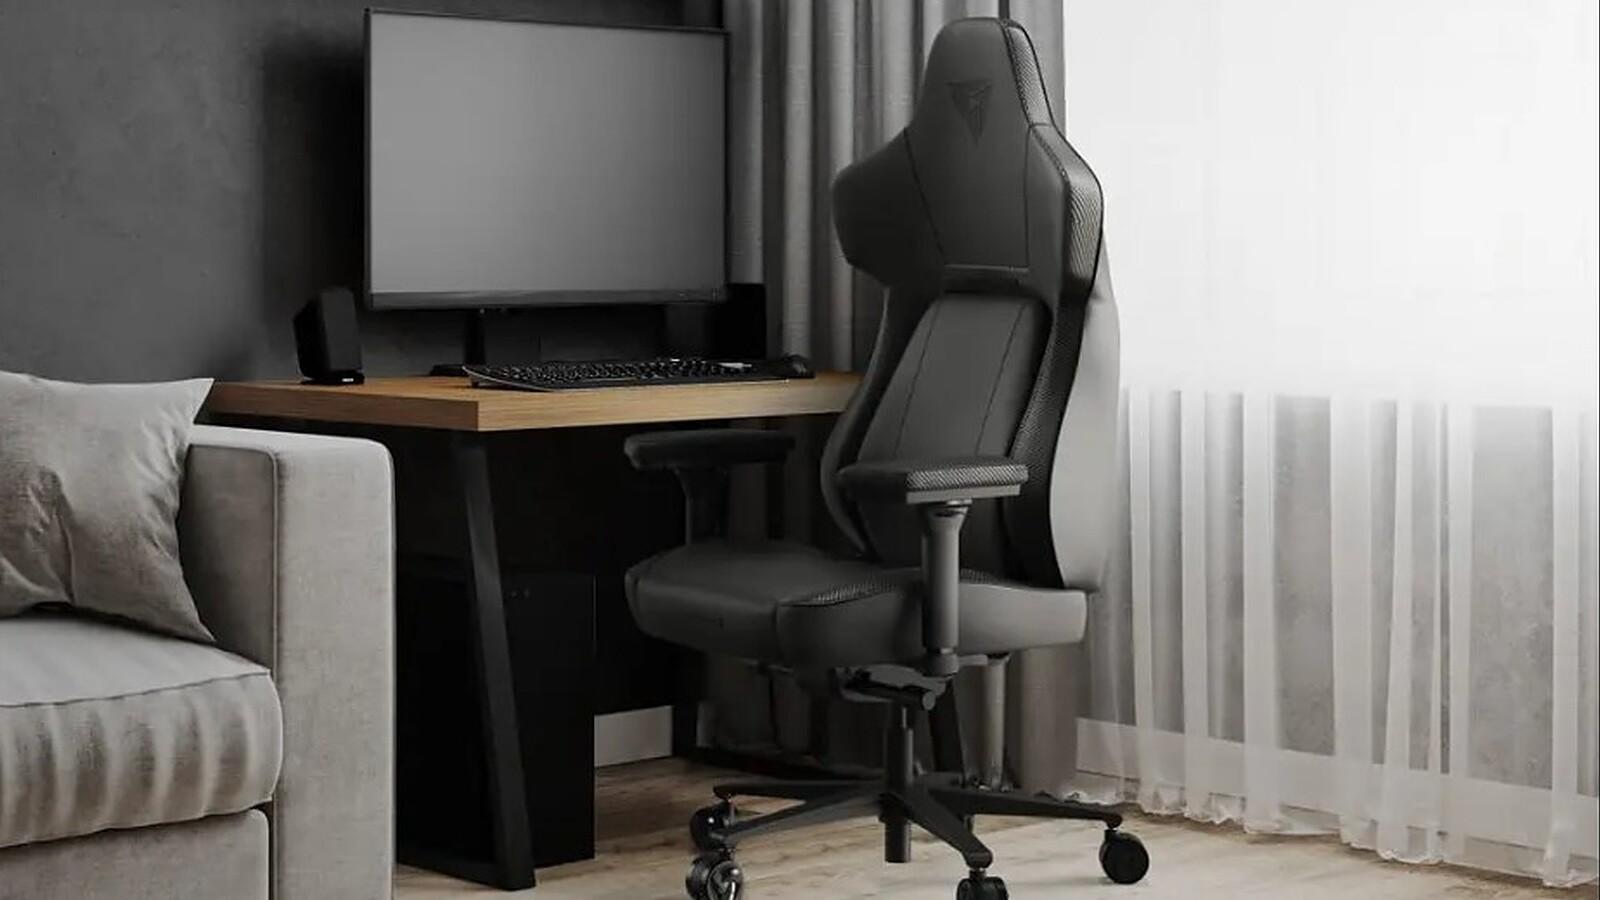 The Thunder X3 Core chair in a study setting